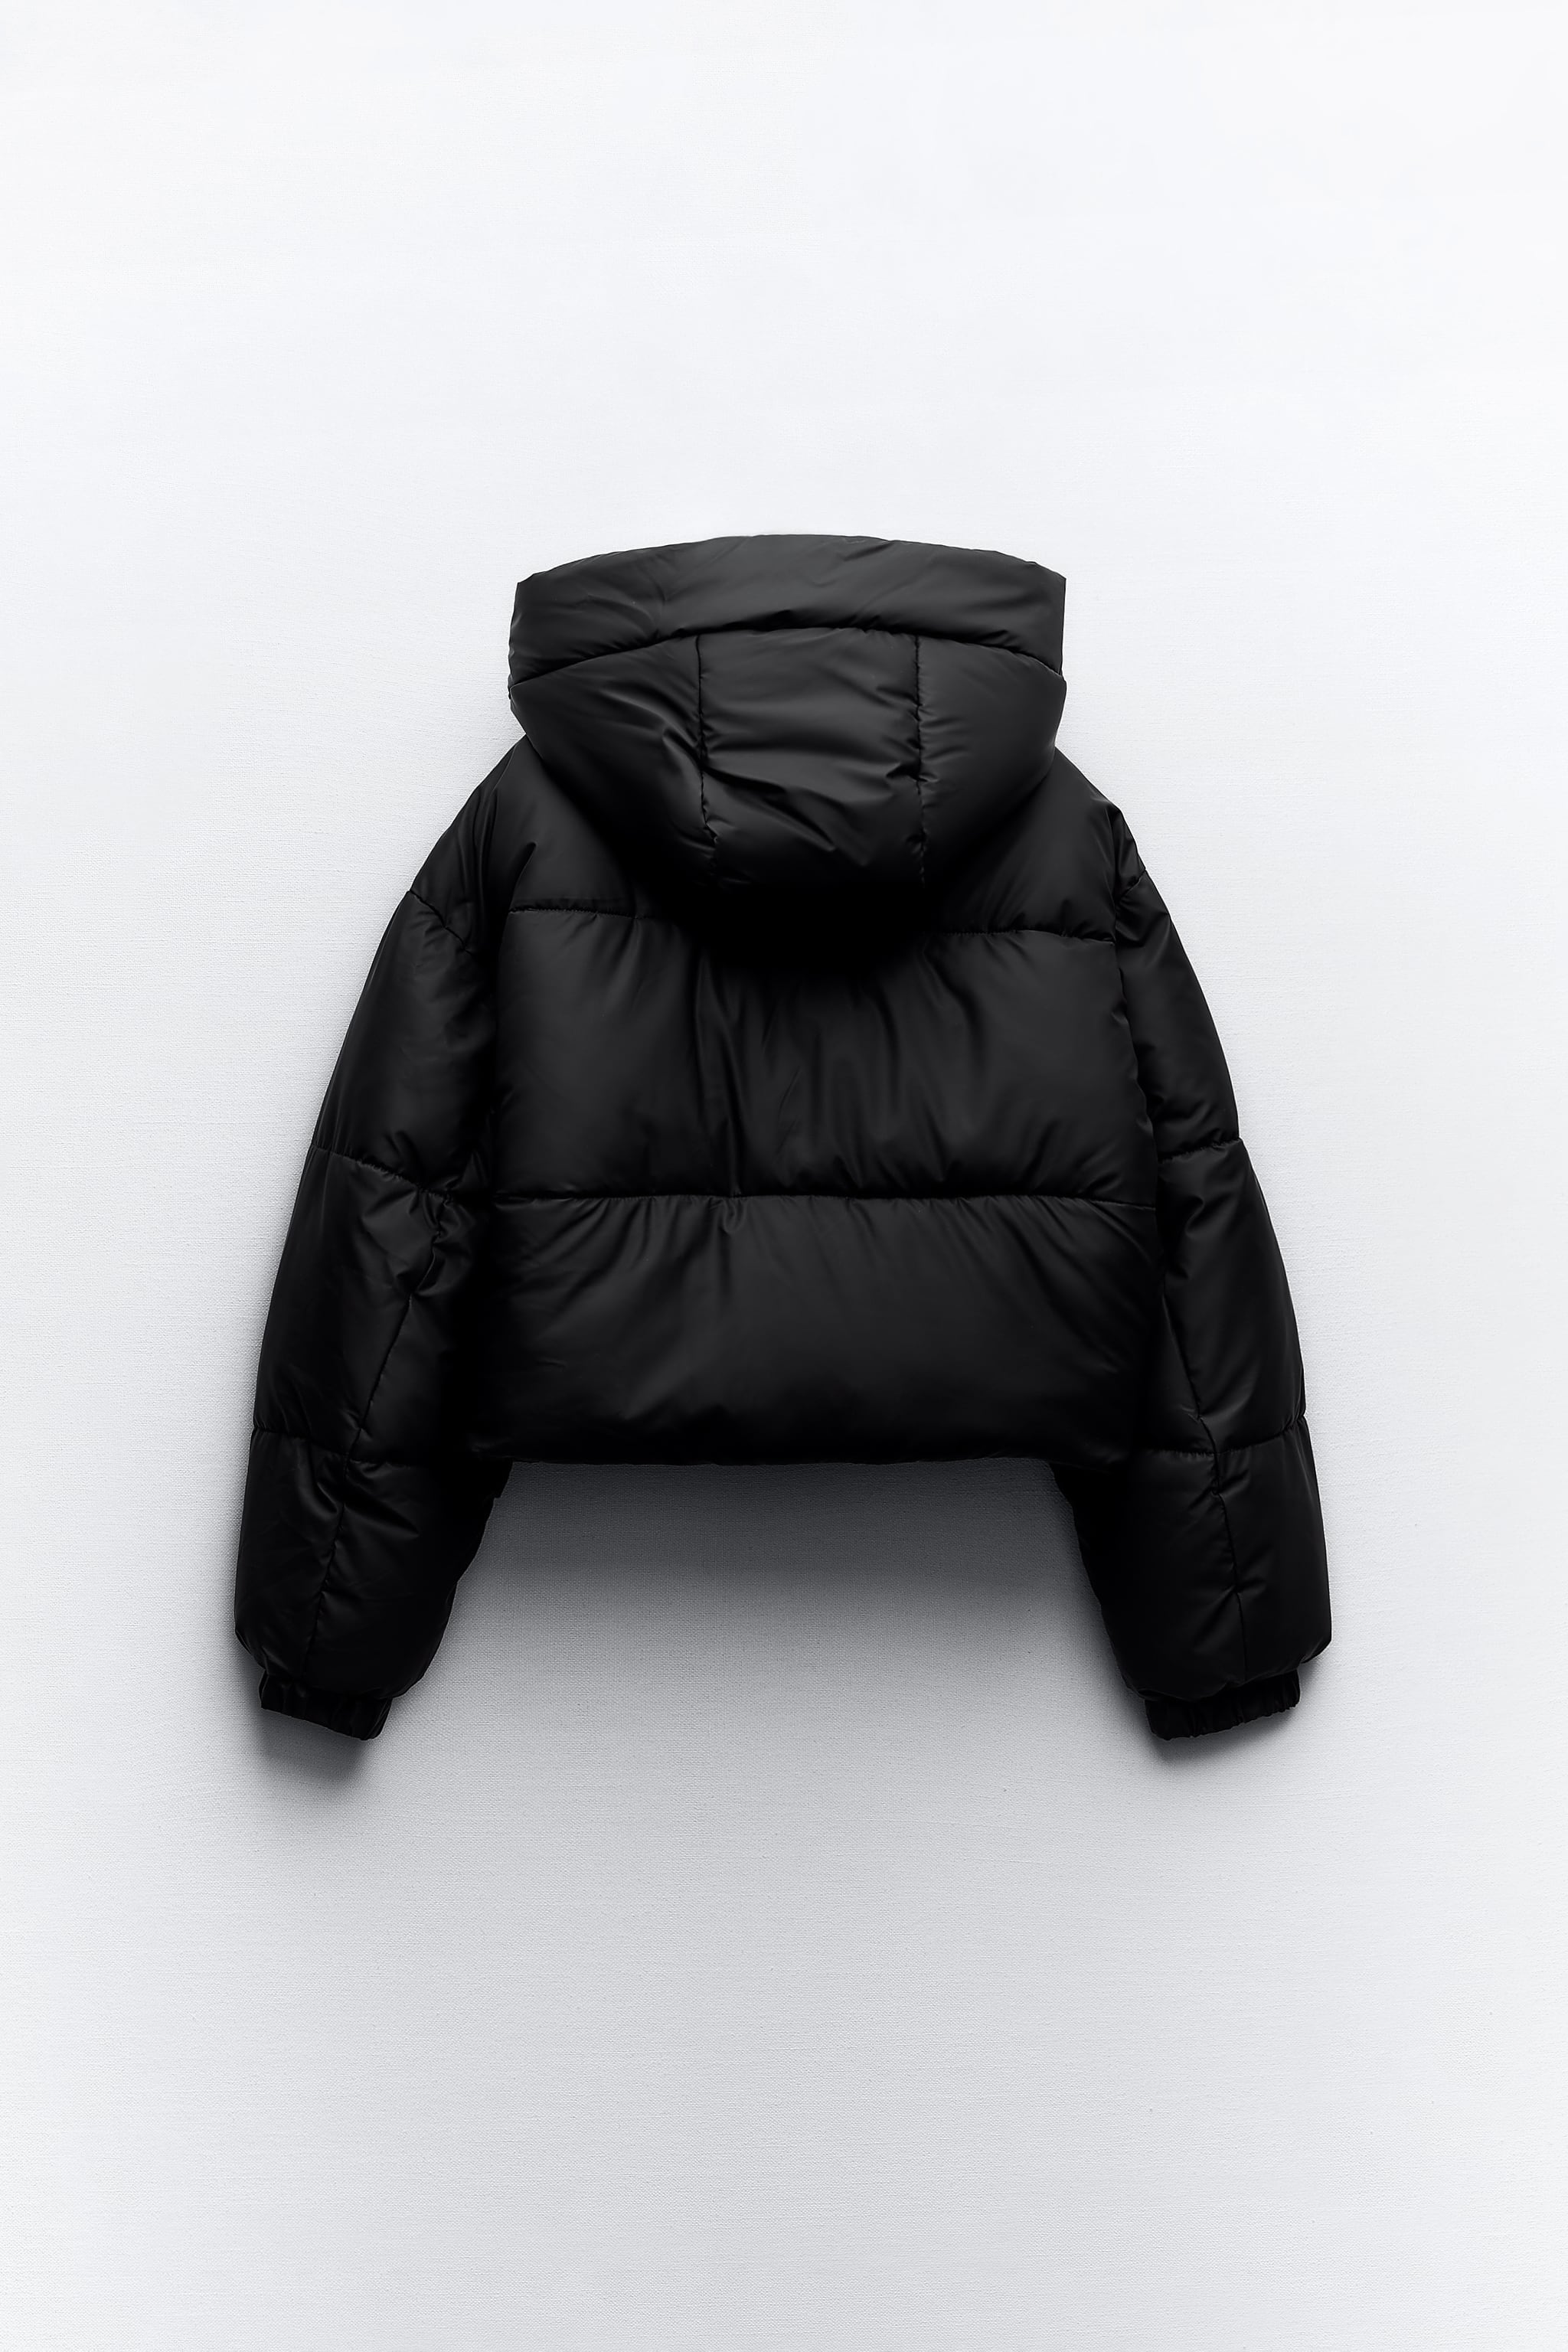 WIND PROTECTION RUBBERIZED ANORAK